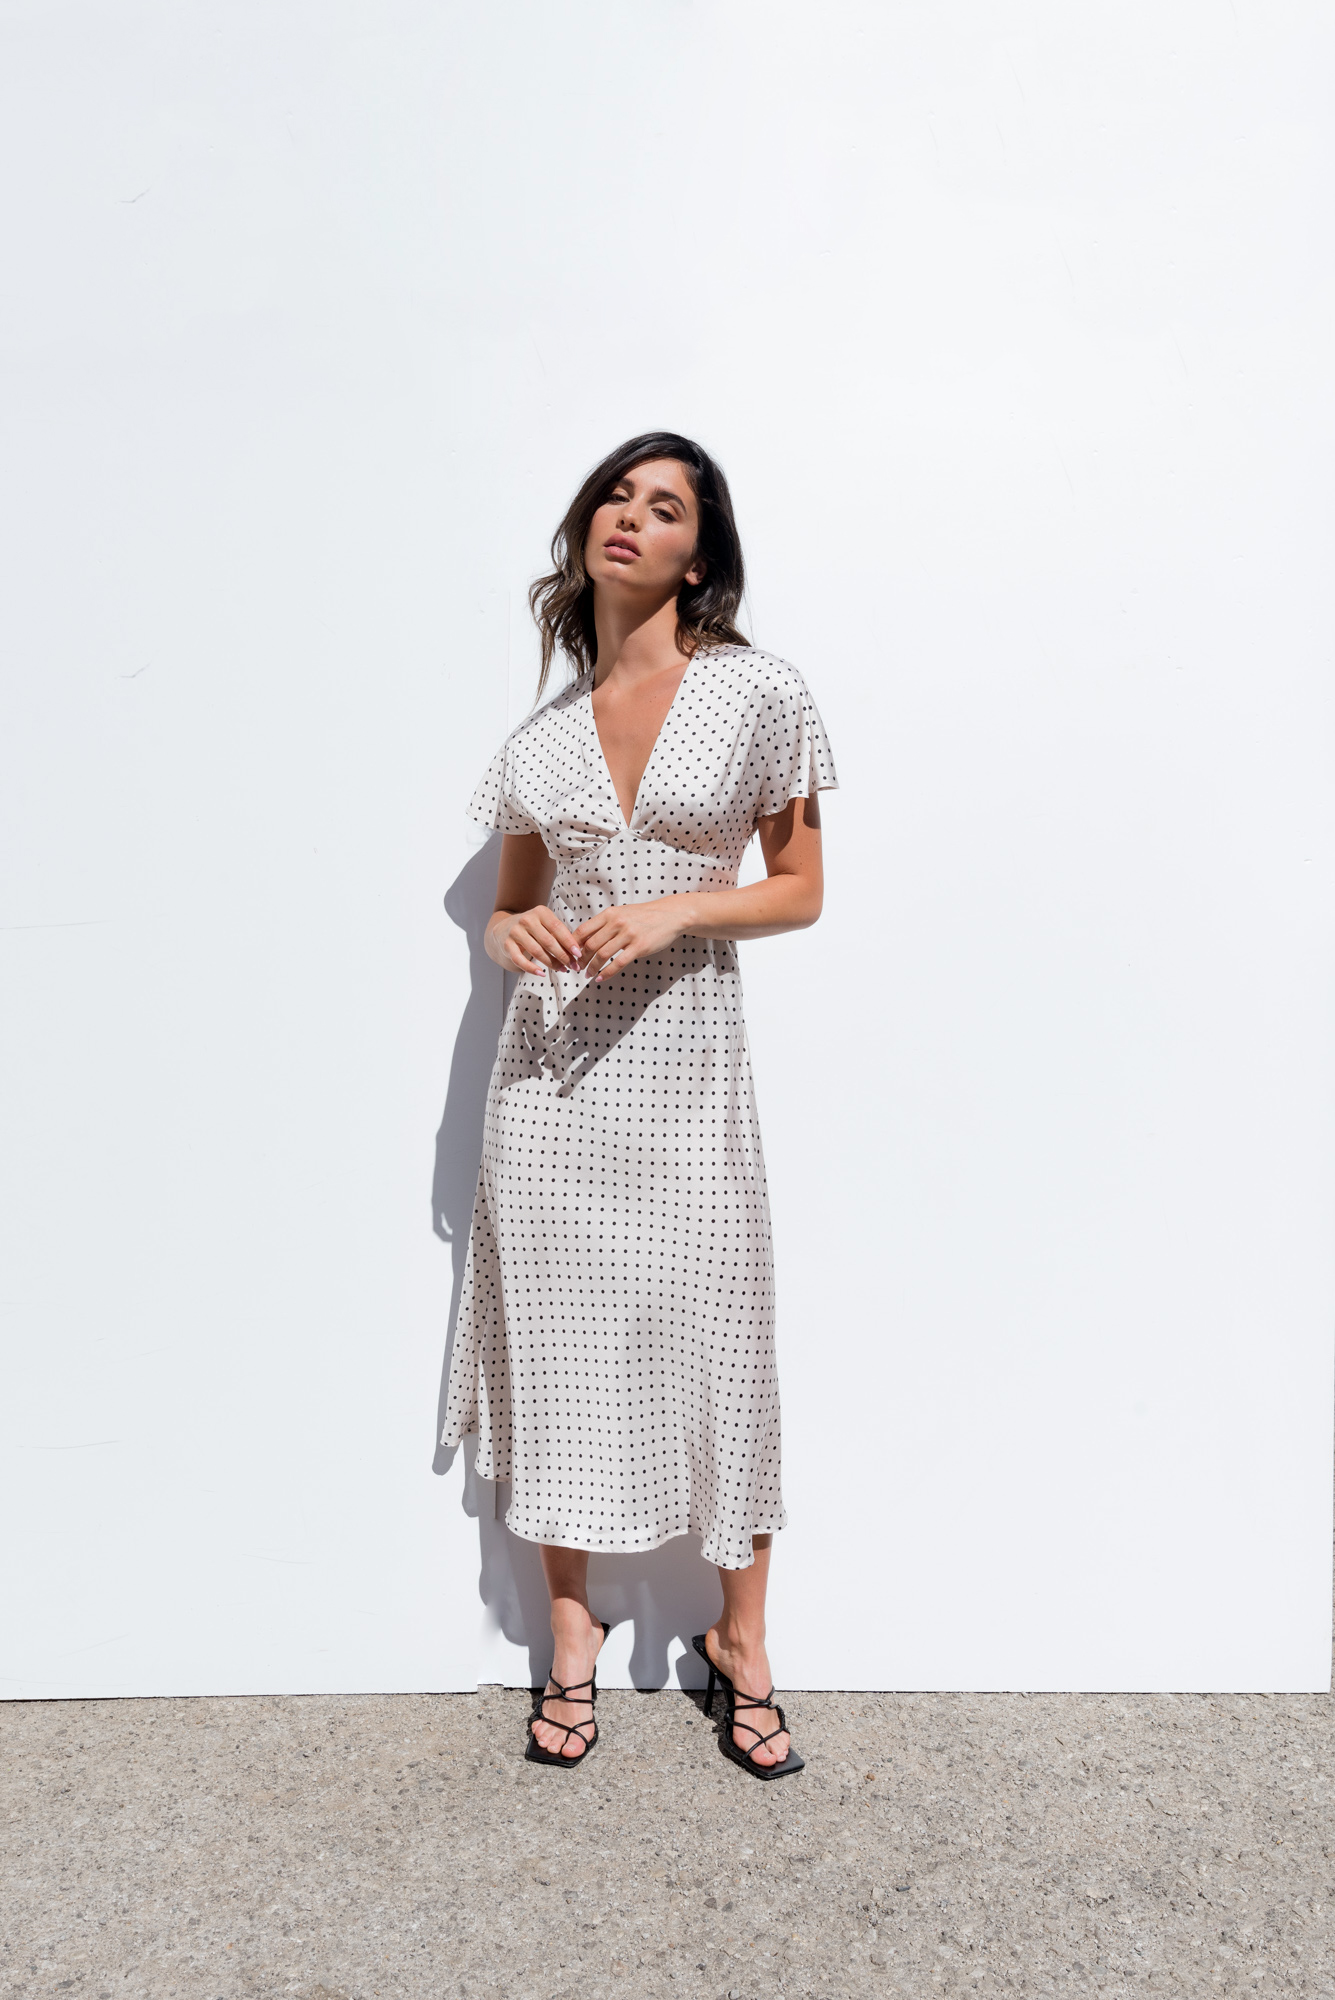 The French 95 - Swiss online shopping for women's fashion - Shop women's polka dot dresses at affordable prices - Free shipping in Switzerland